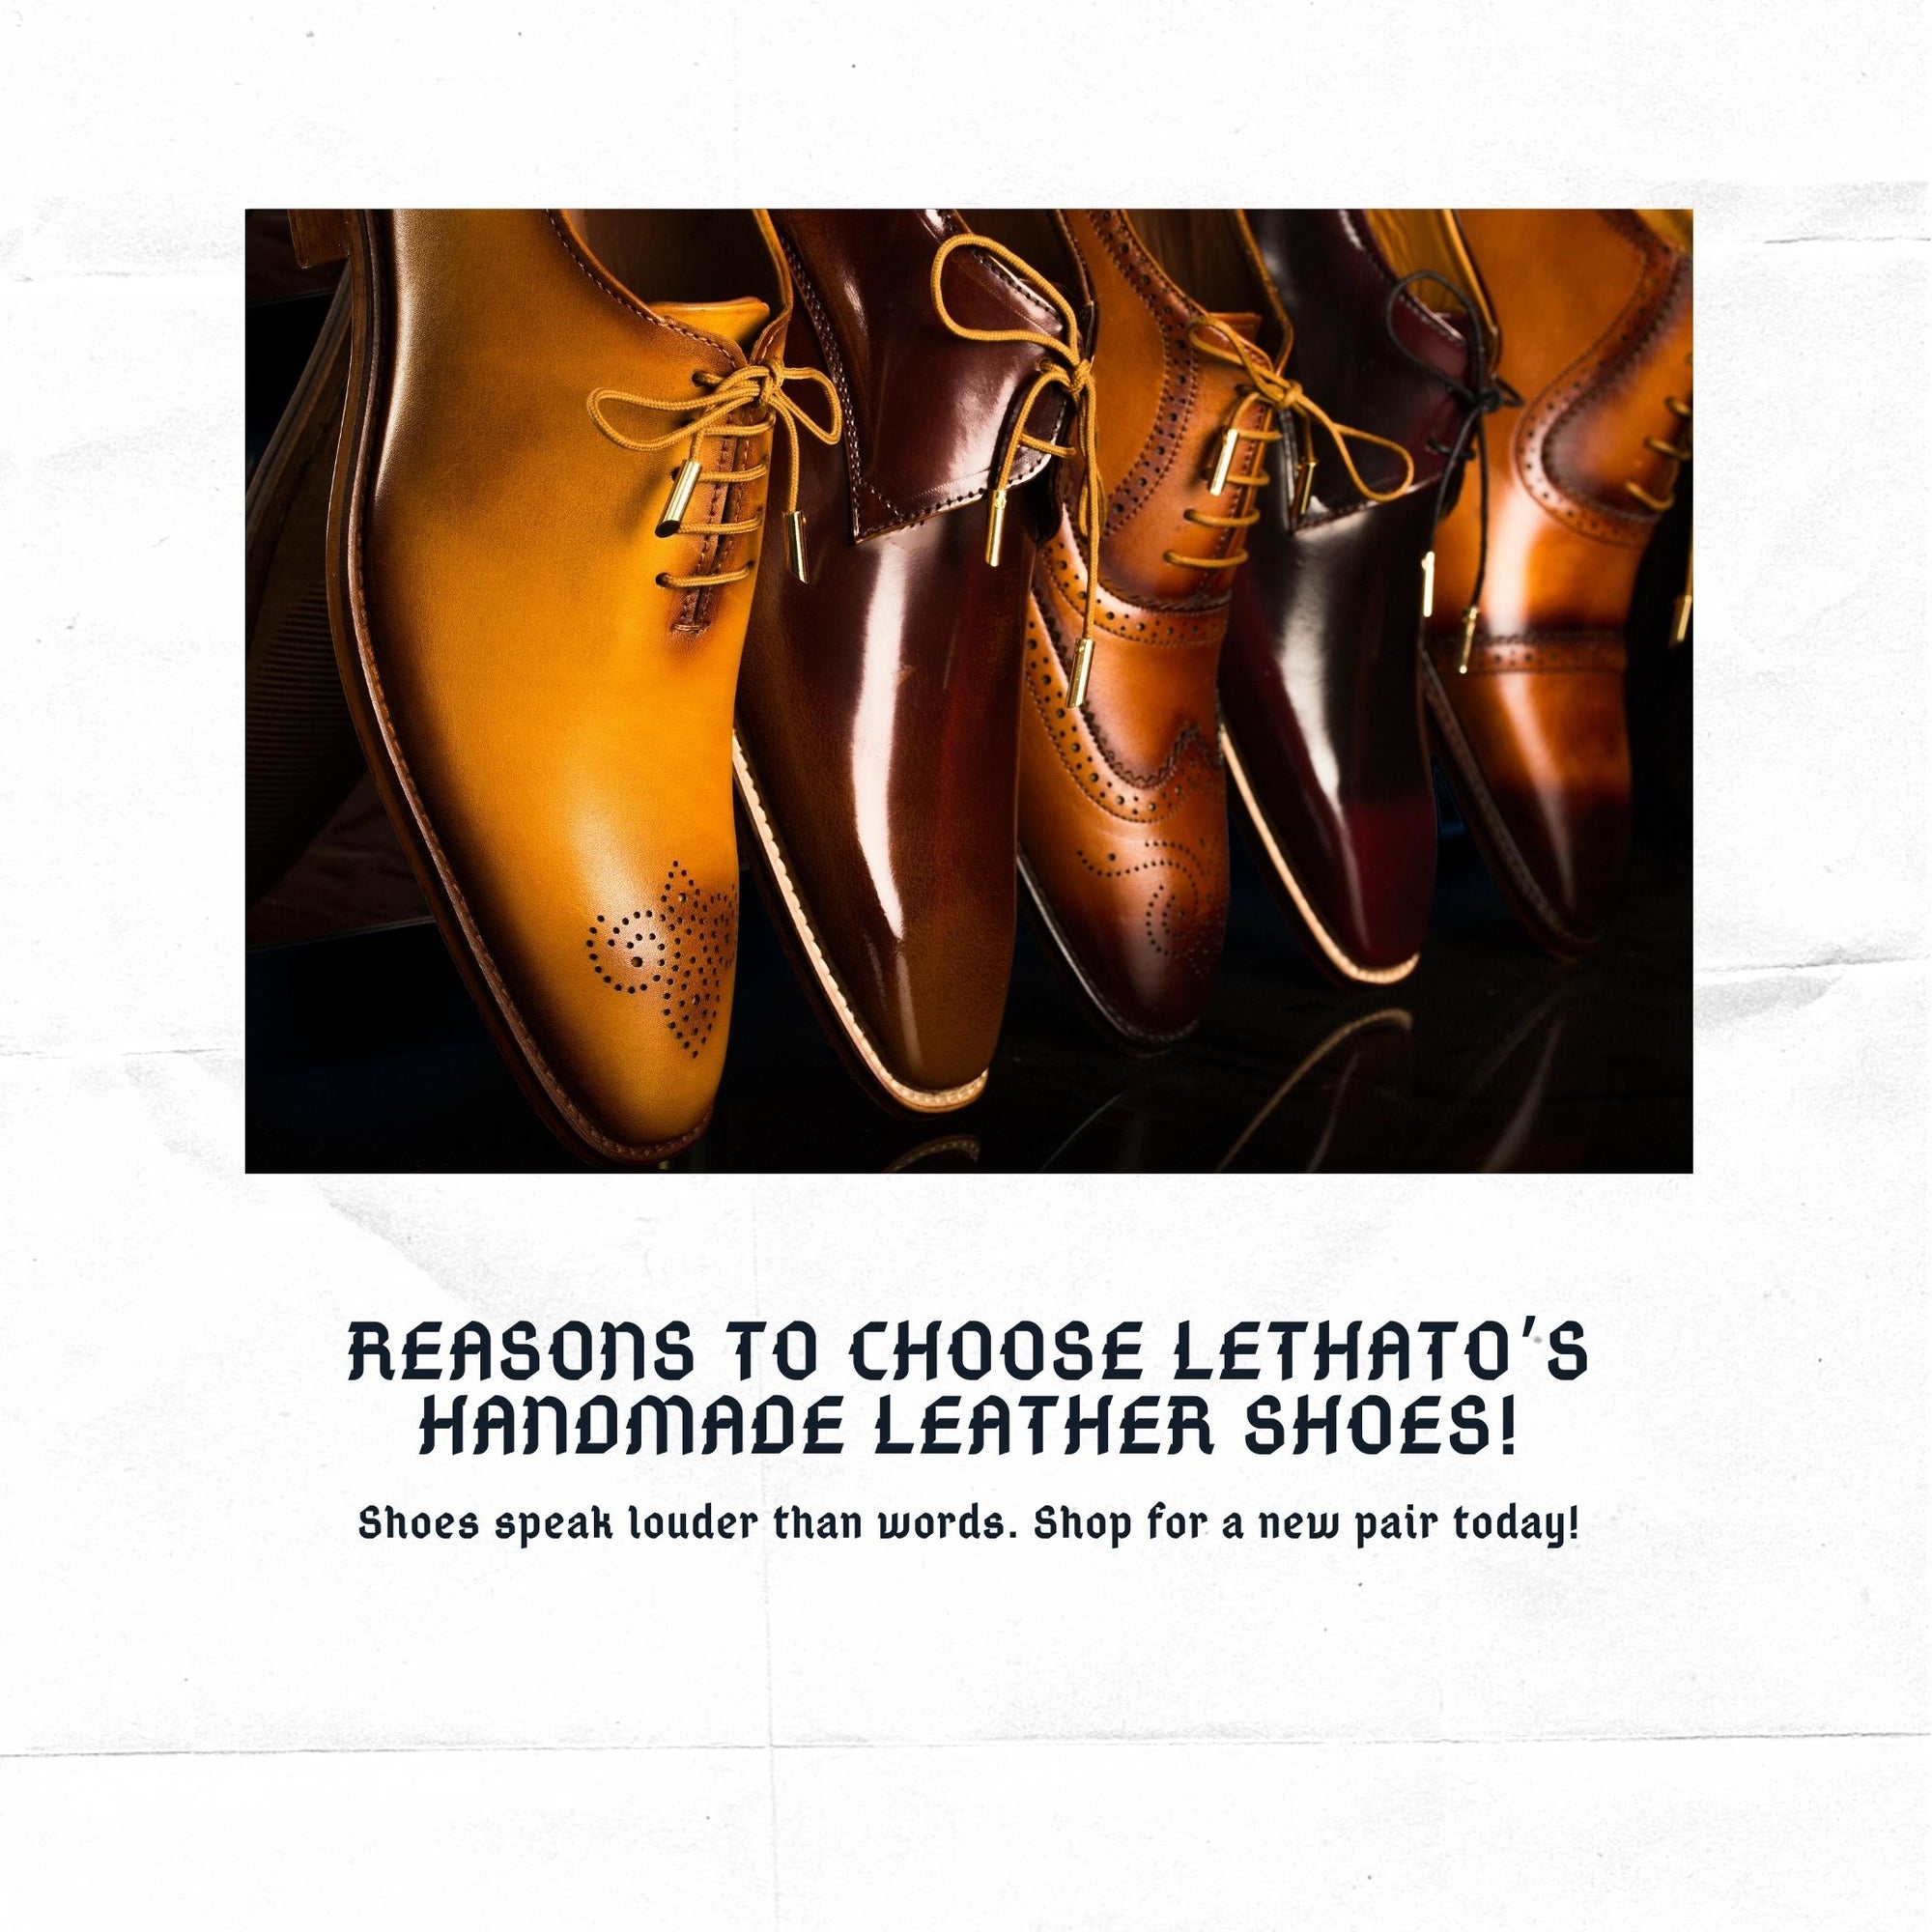 Reasons To Choose Lethato’s Handmade Leather Shoes!